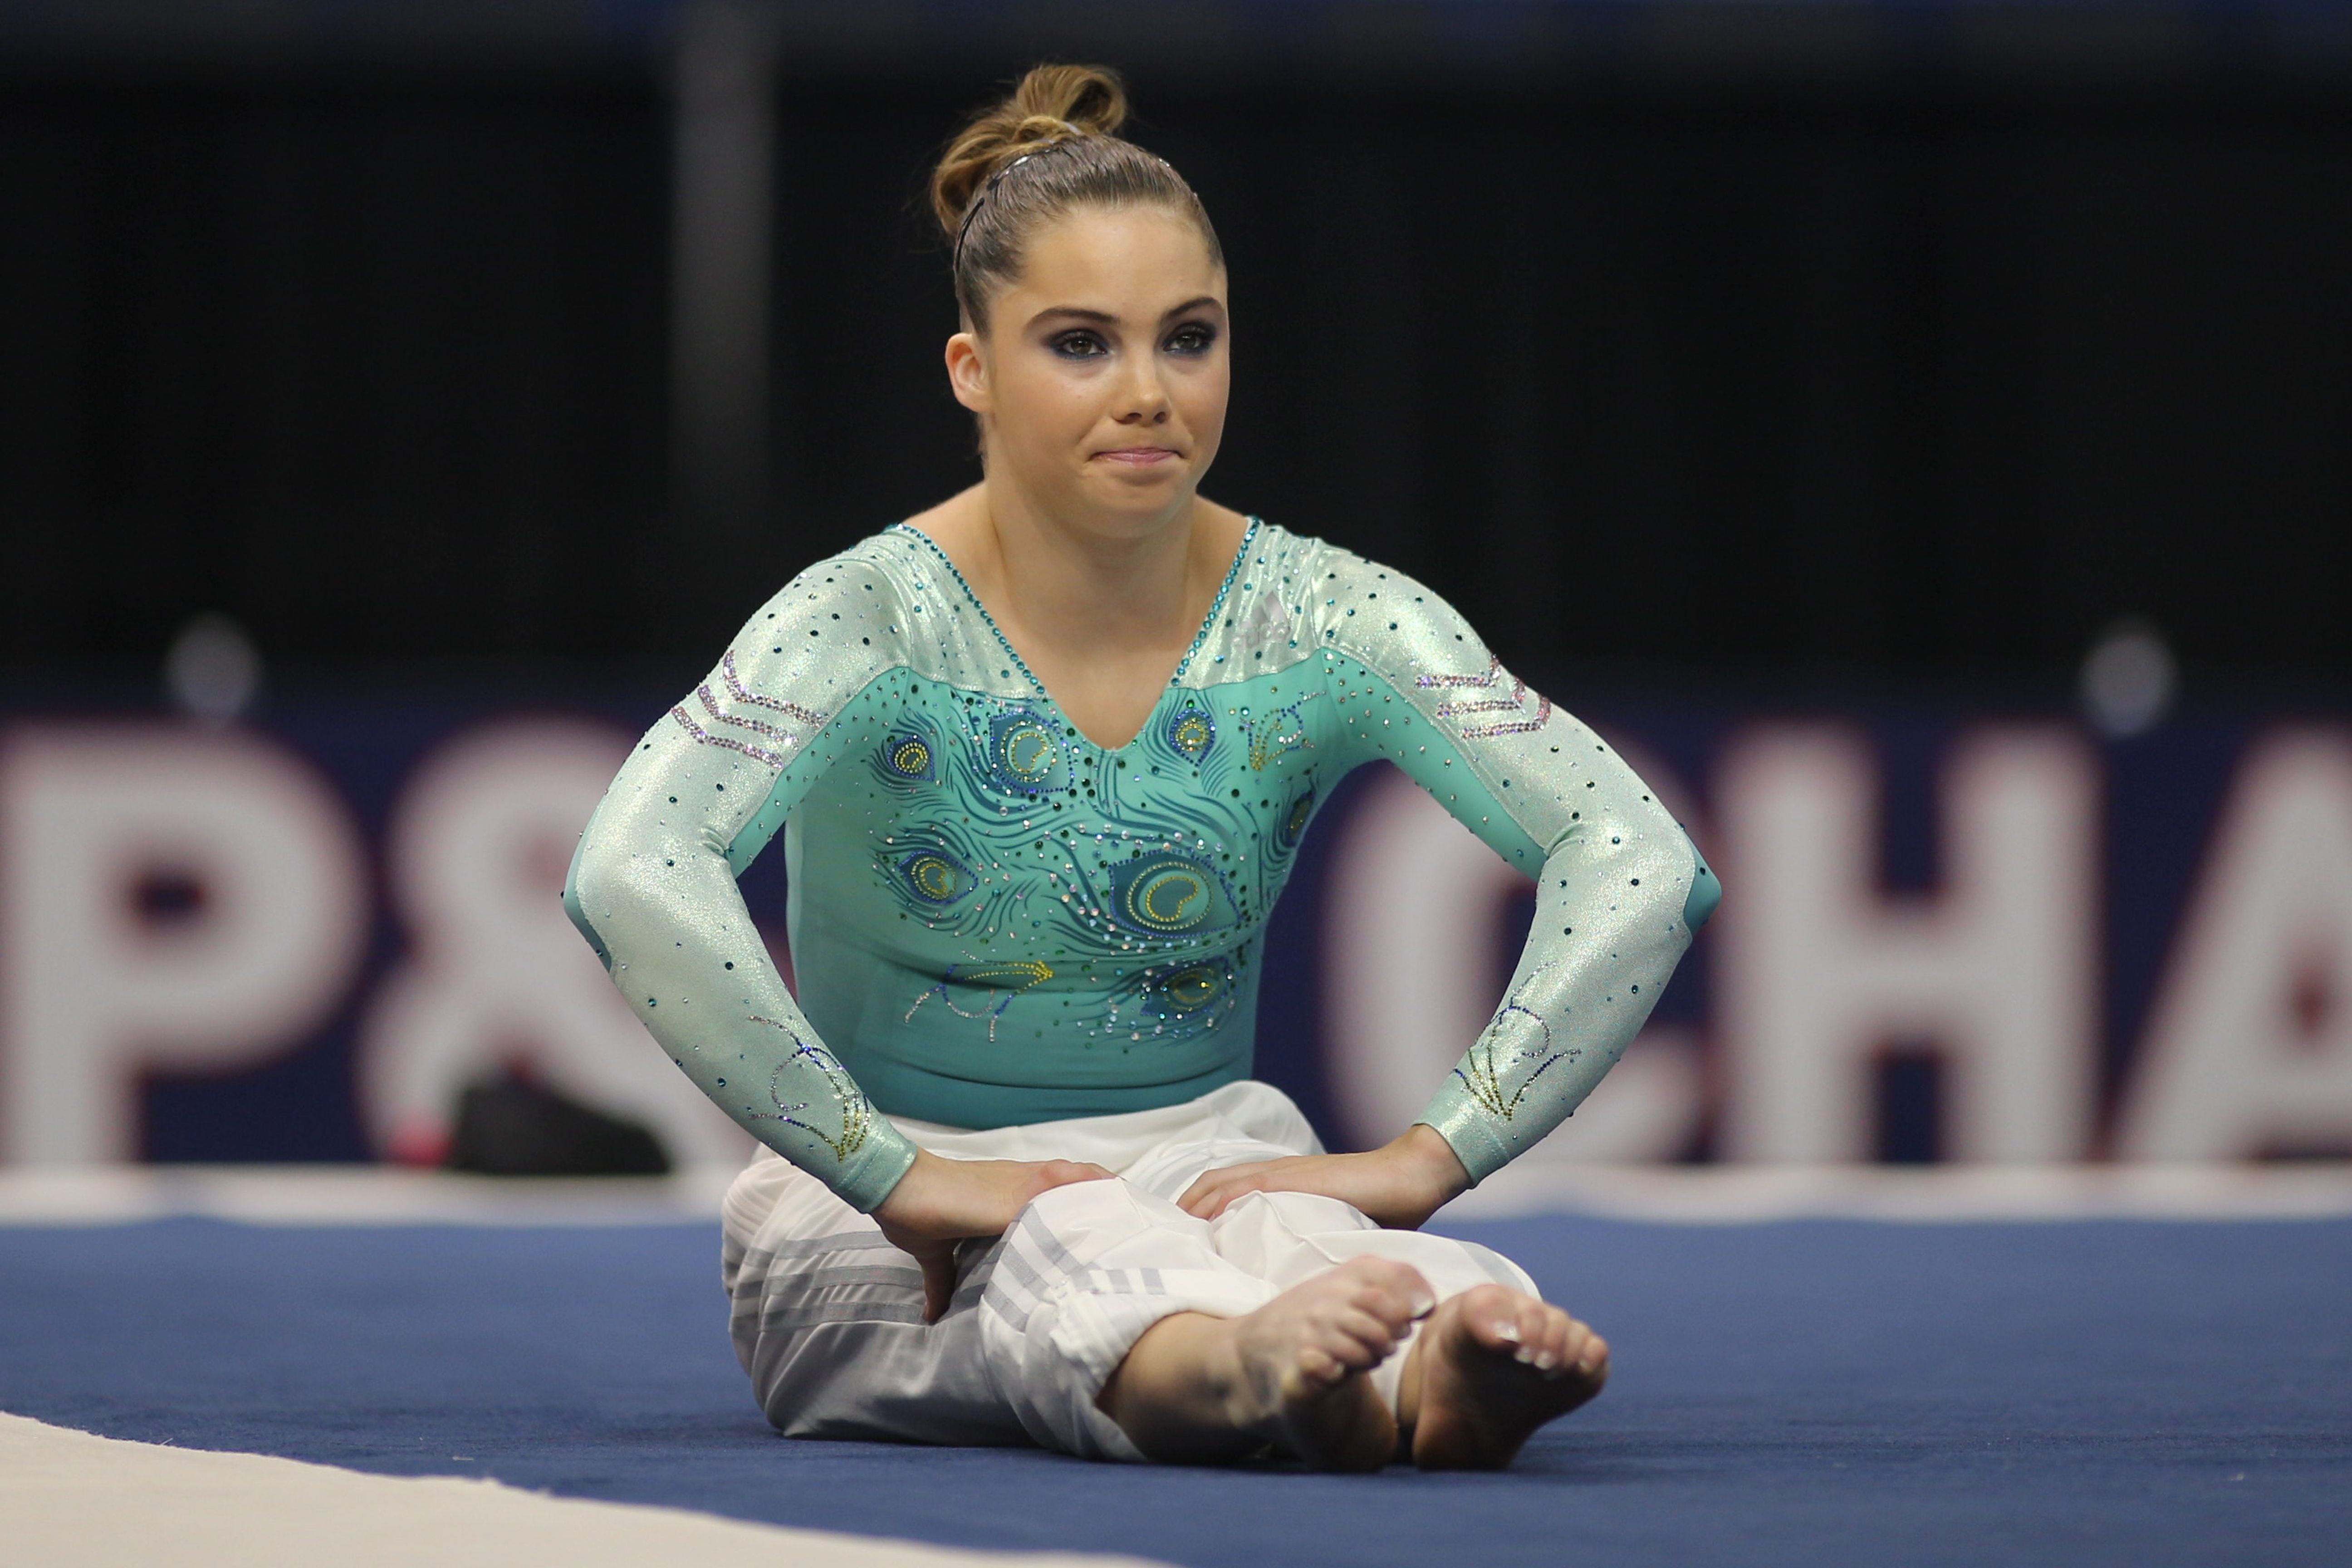 McKayla Maroney during the Senior Women Competition at The 2013 P&G Gymnastics on 15th August 2013 | Photo: Getty Images